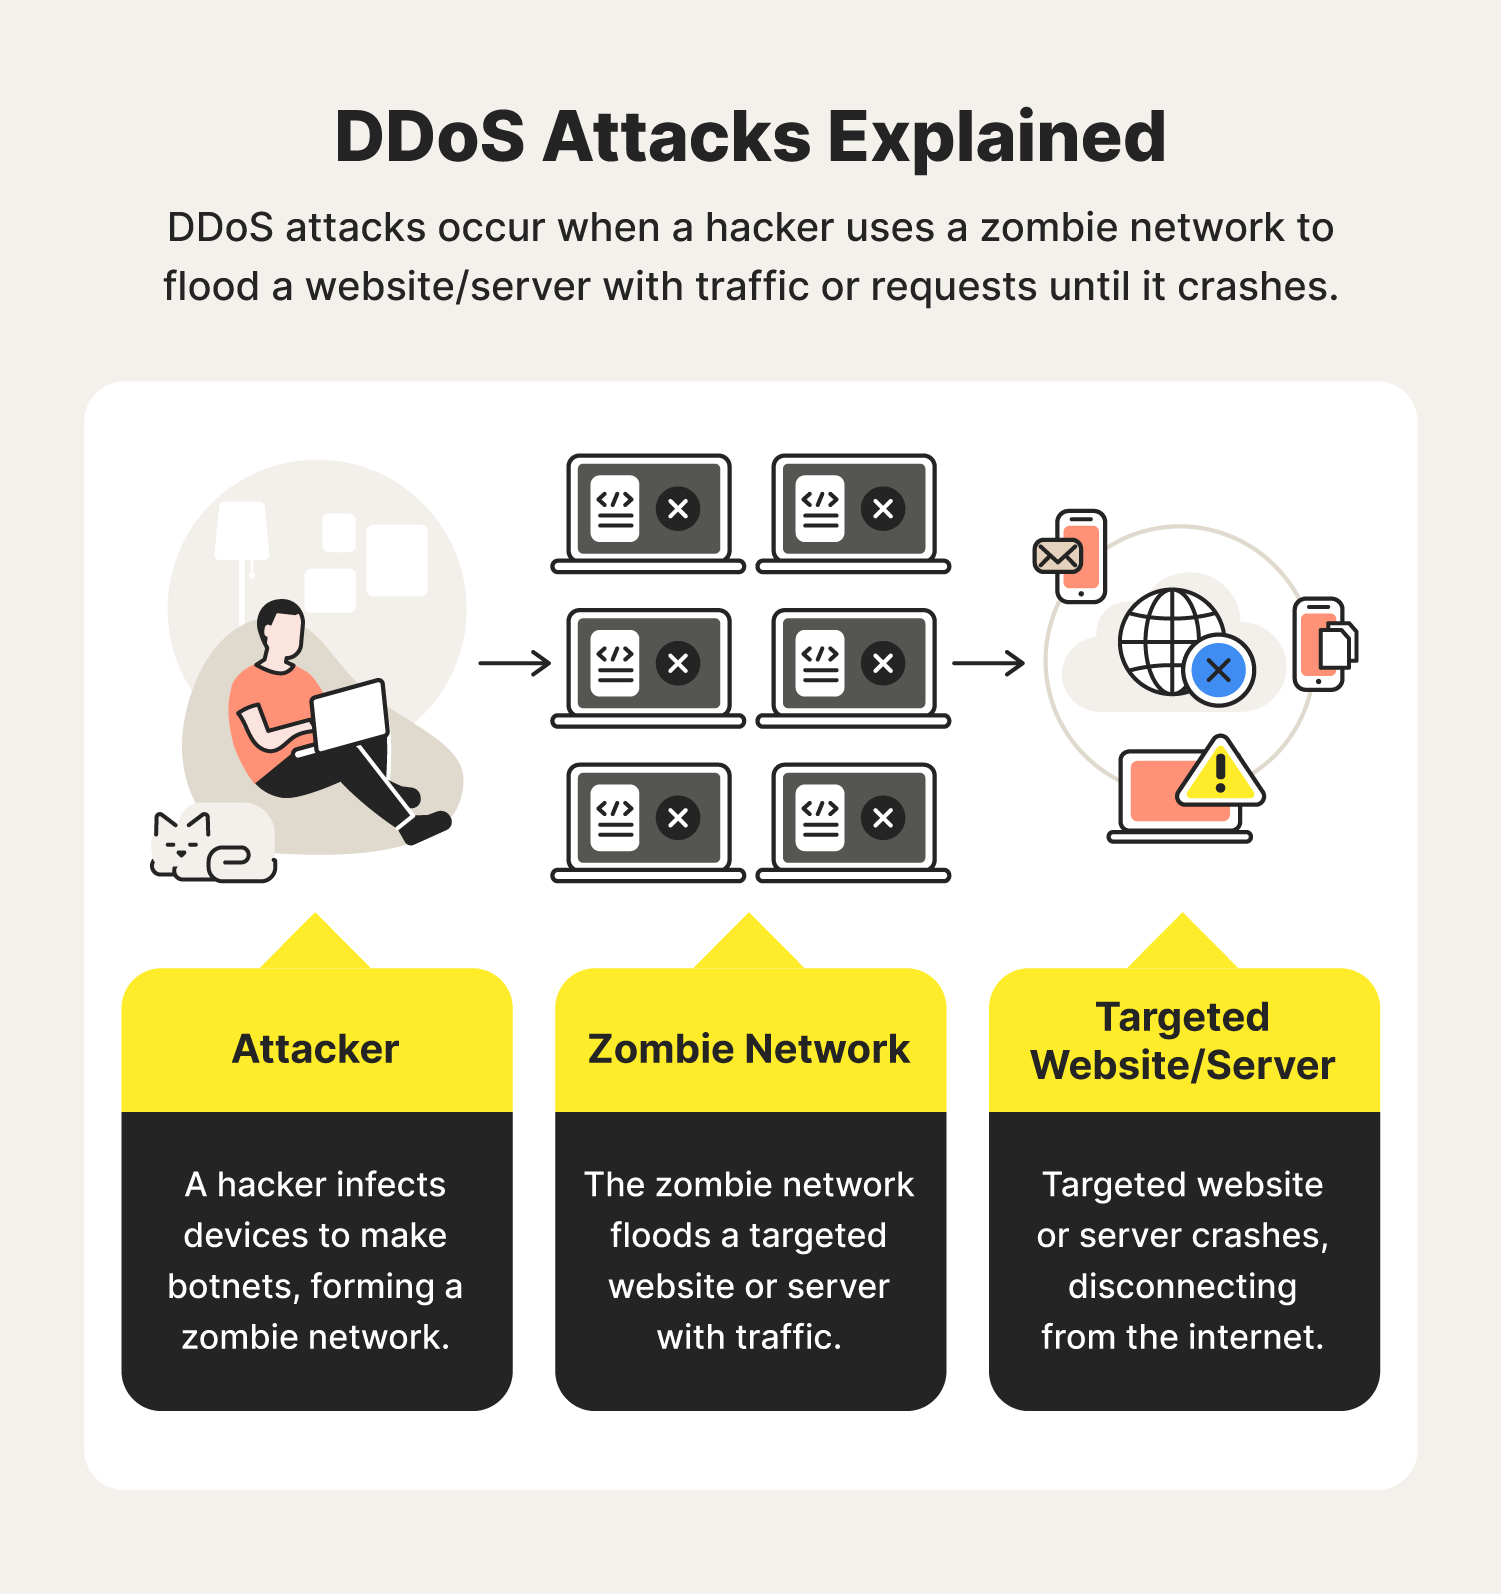 Three illustrations help depict how DDoS attacks work. 